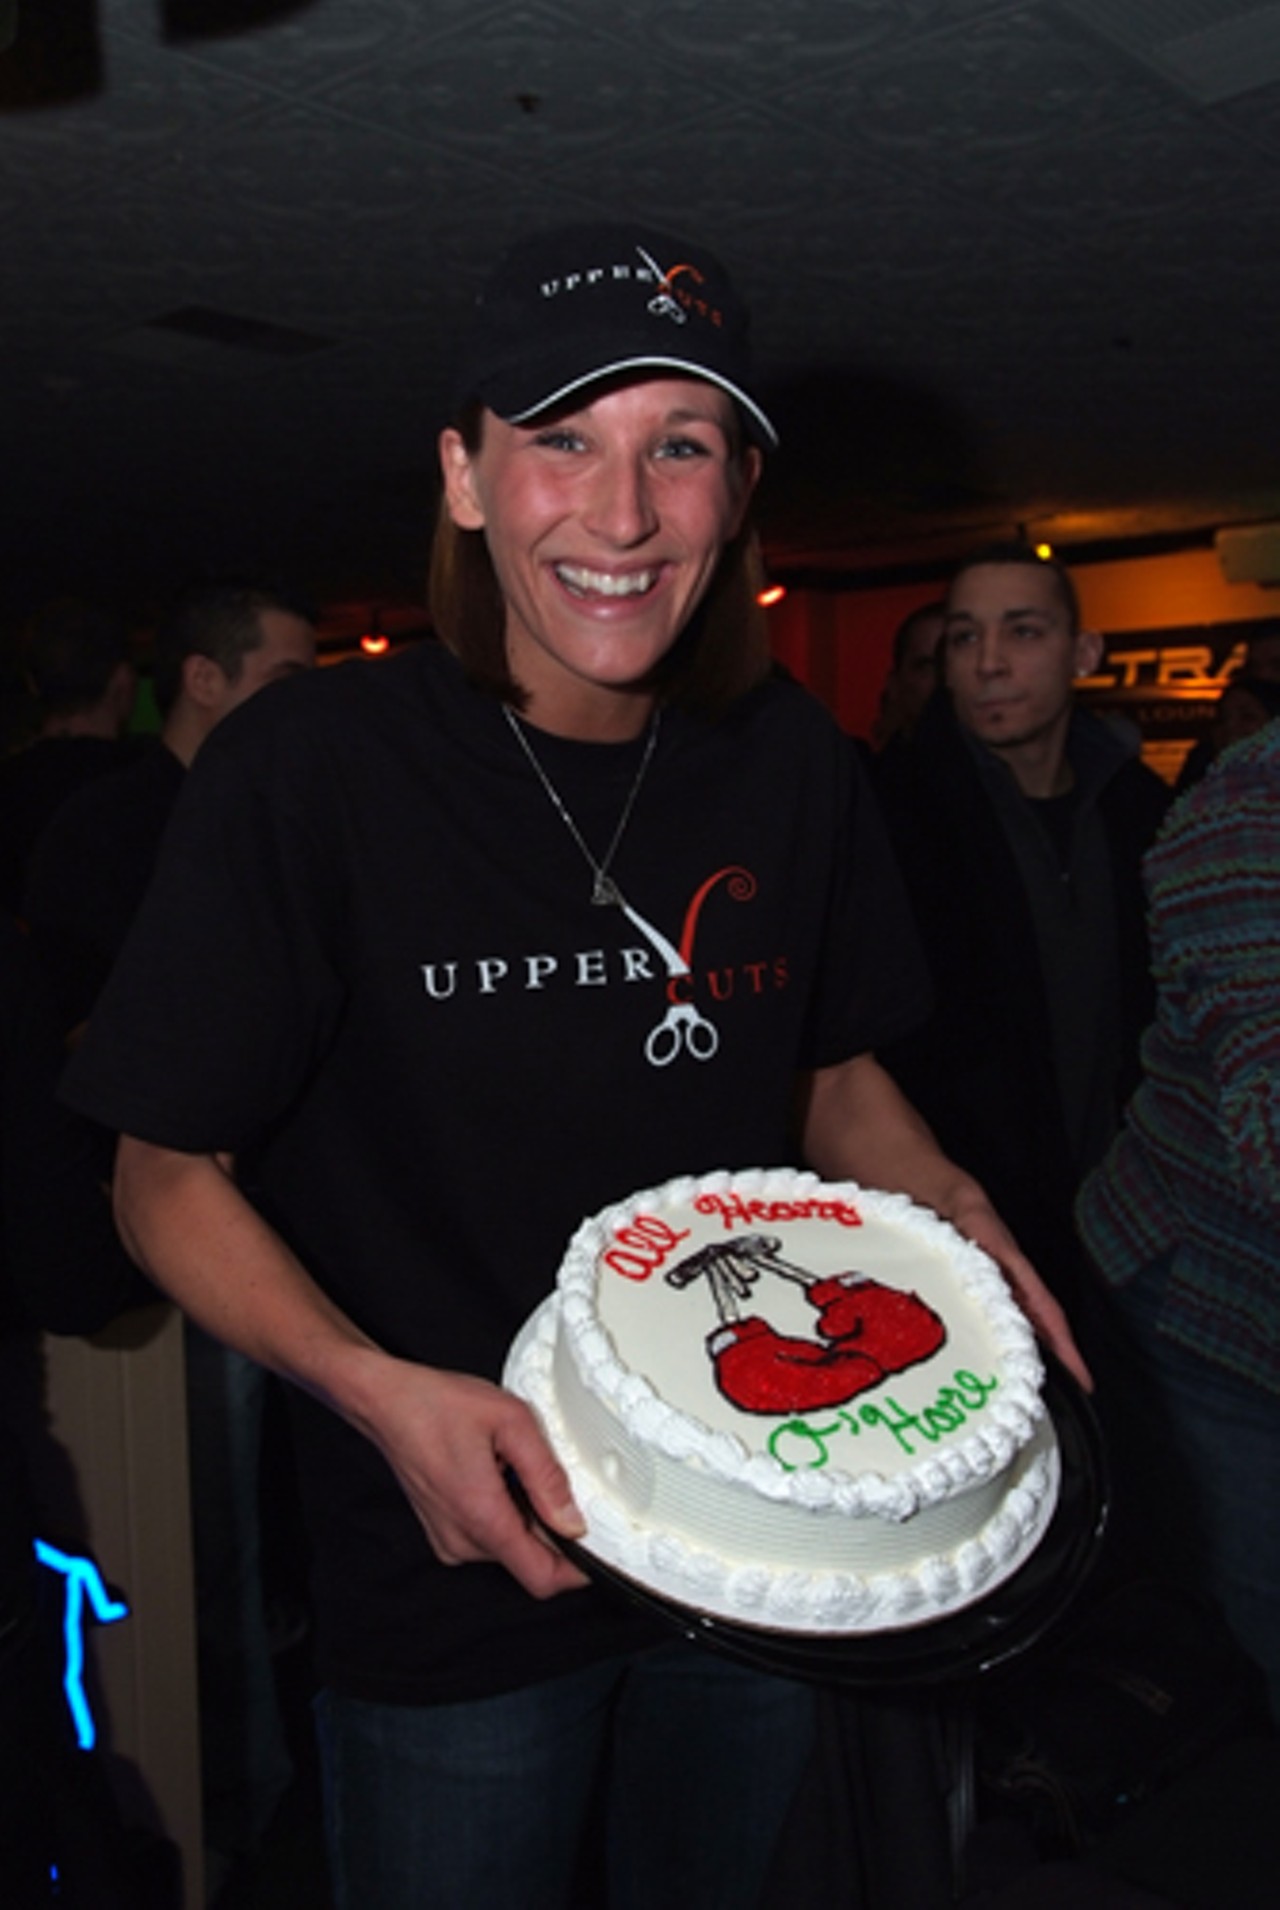 O'Hare shows off her 10-inch Dairy Queen ice cream cake. It's a post weigh-in tradition to gorge on the cake after shaving pounds to make the 150-pound weight limit.